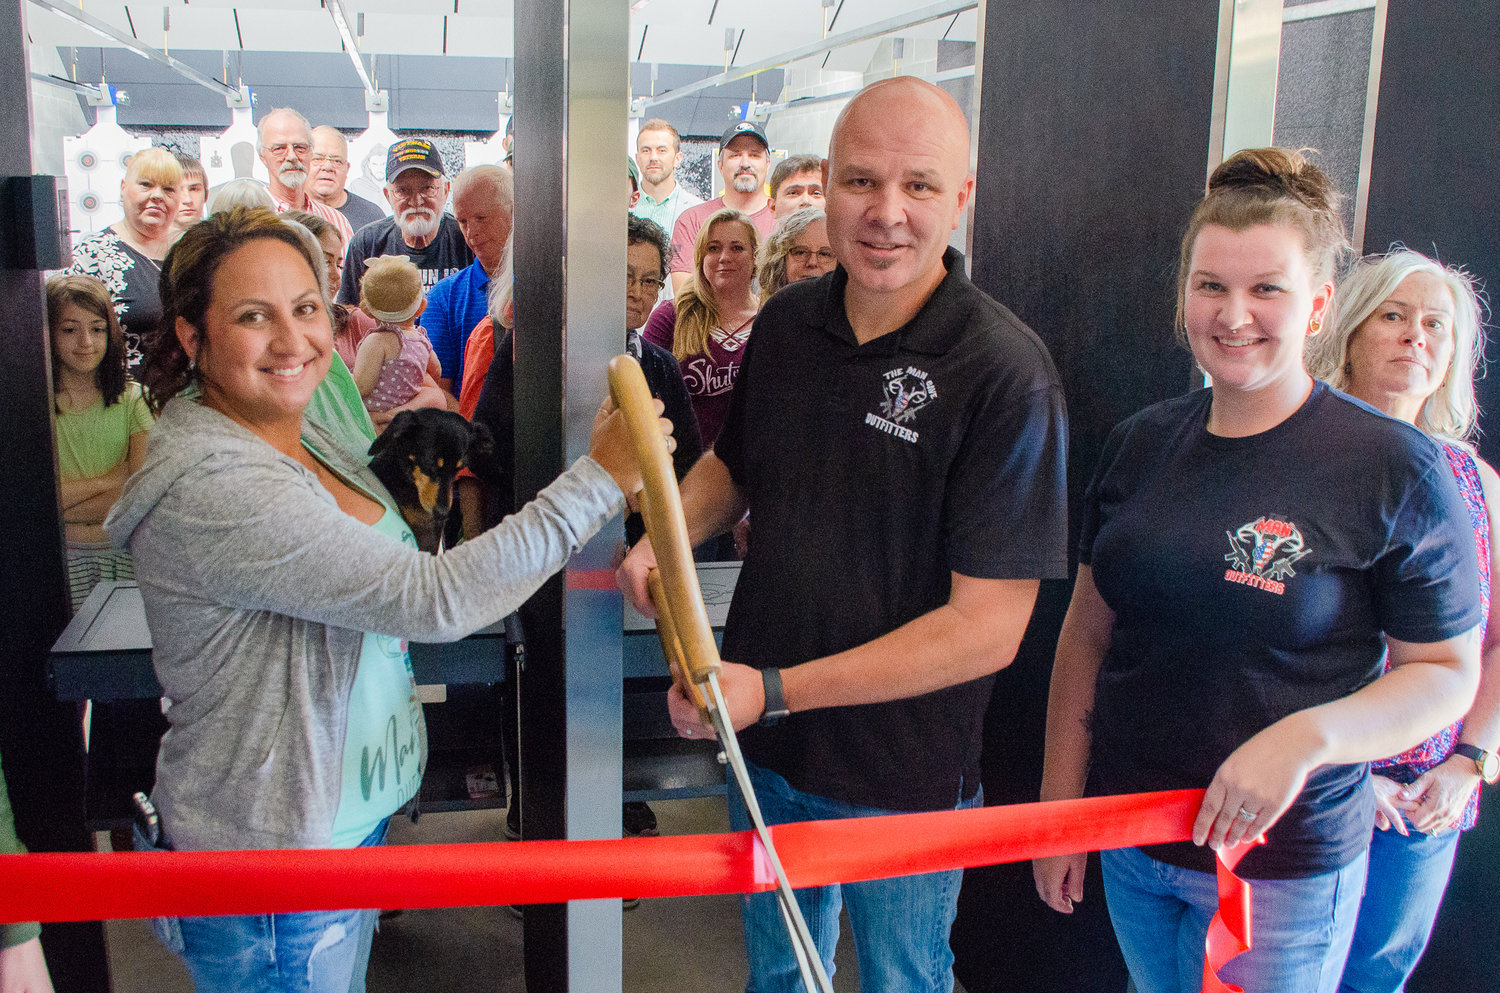 The Man Cave Outfitters co-owners Shoni and Hobe Pannkuk position the Centralia-Chehalis Chamber of Commerce’s giant scissors Monday afternoon during a ribbon-cutting event.